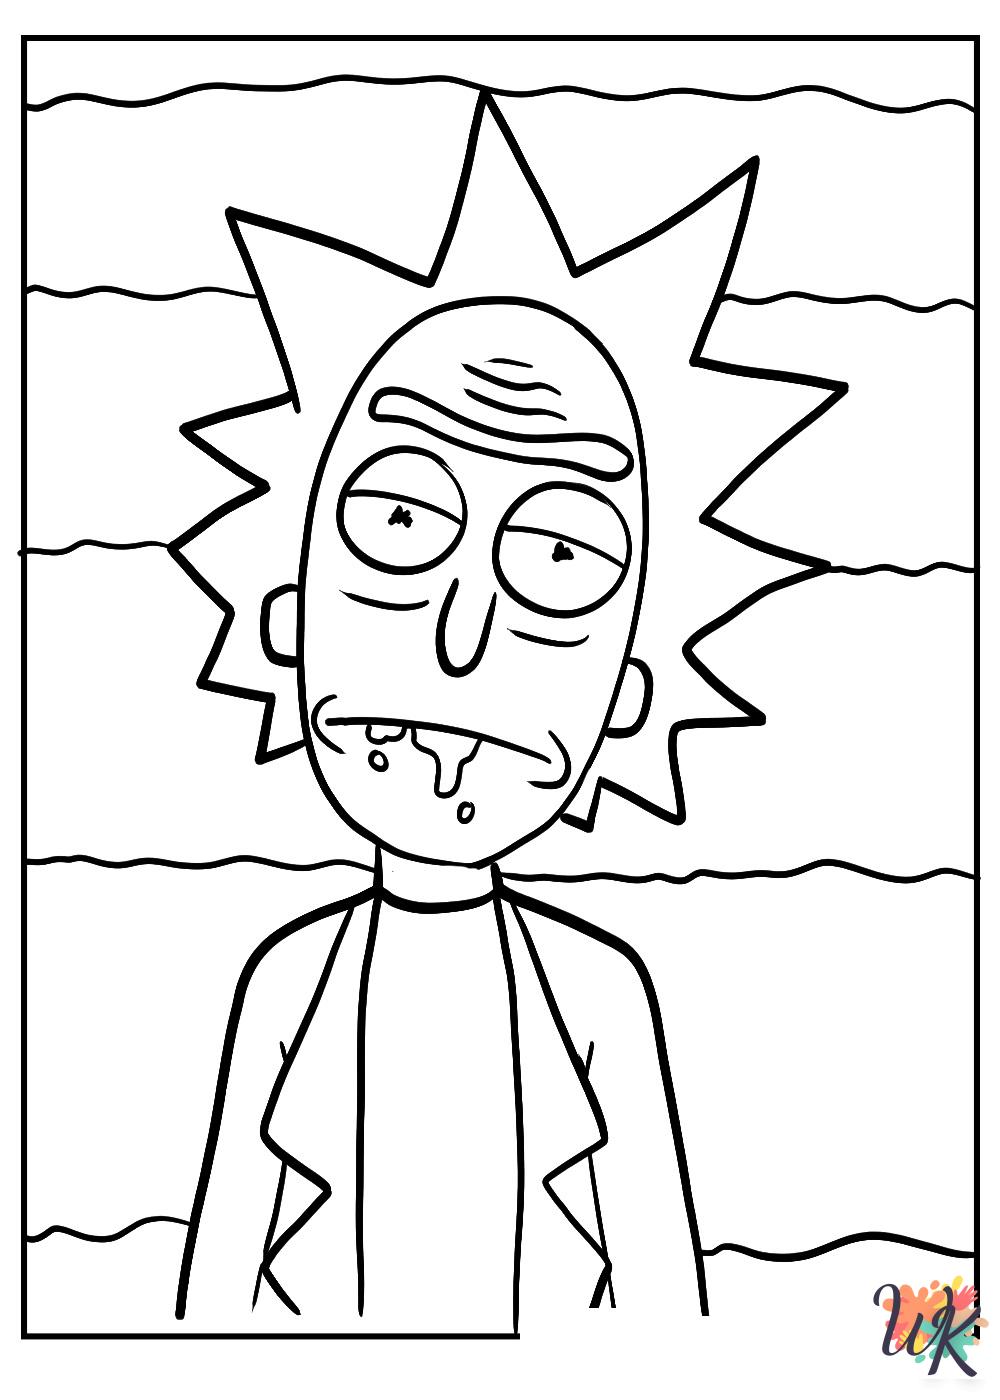 free printable Rick and Morty coloring pages